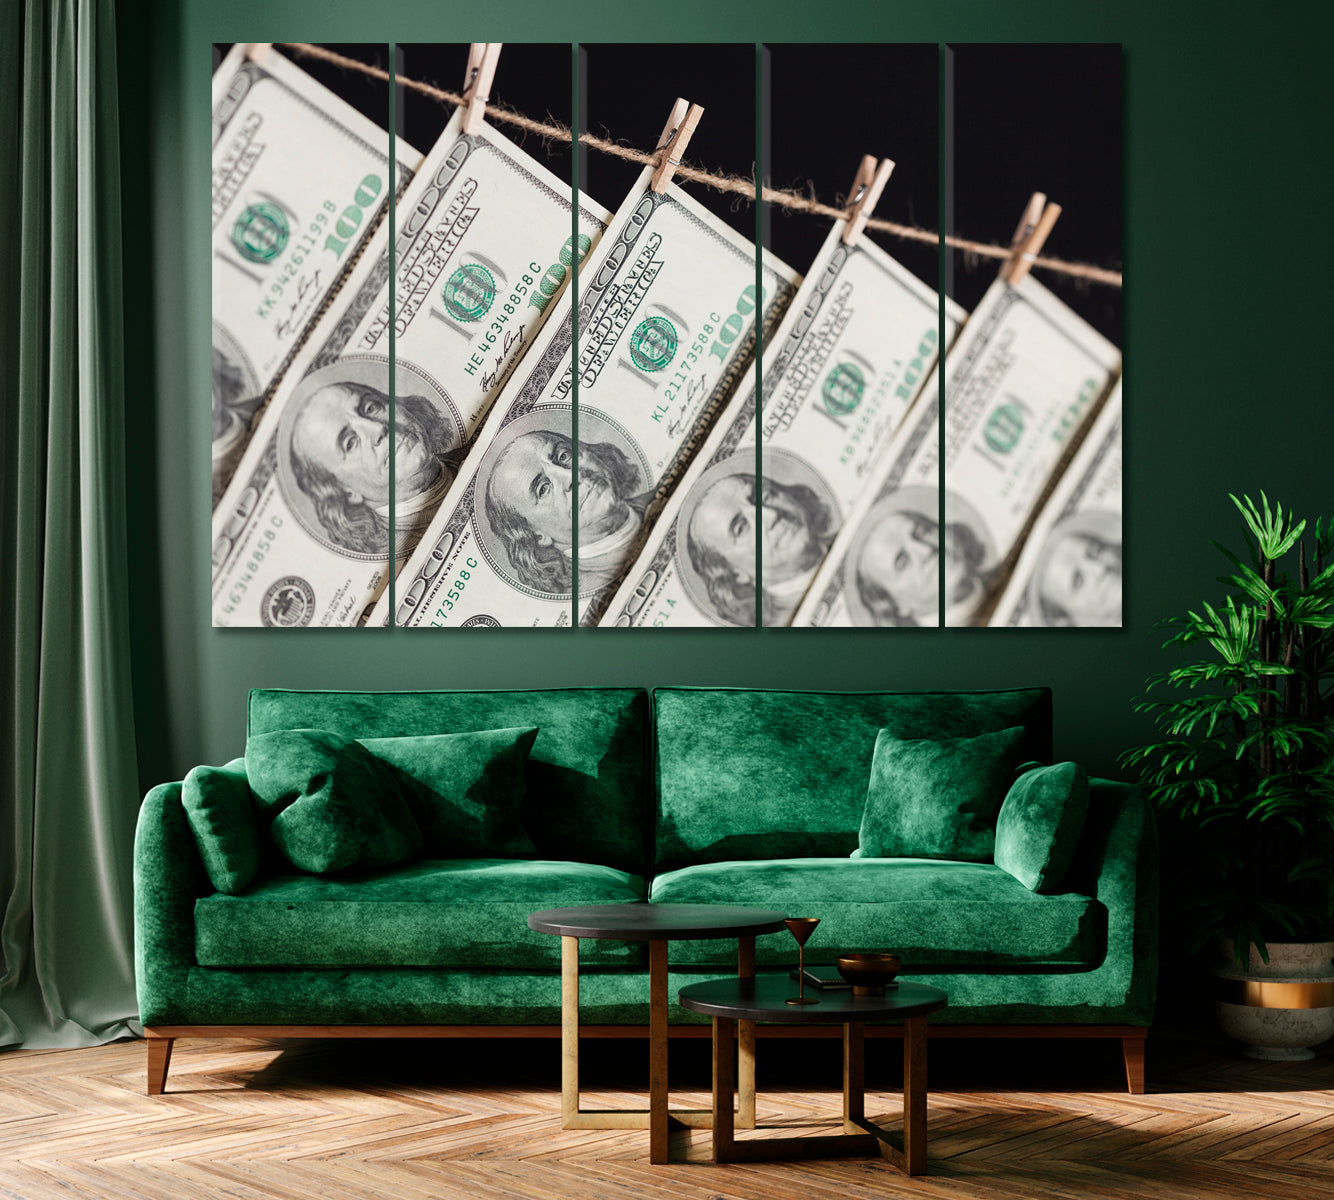 Hundred Dollar Bills Hanging From a Clothesline Canvas Print ArtLexy 5 Panels 36"x24" inches 